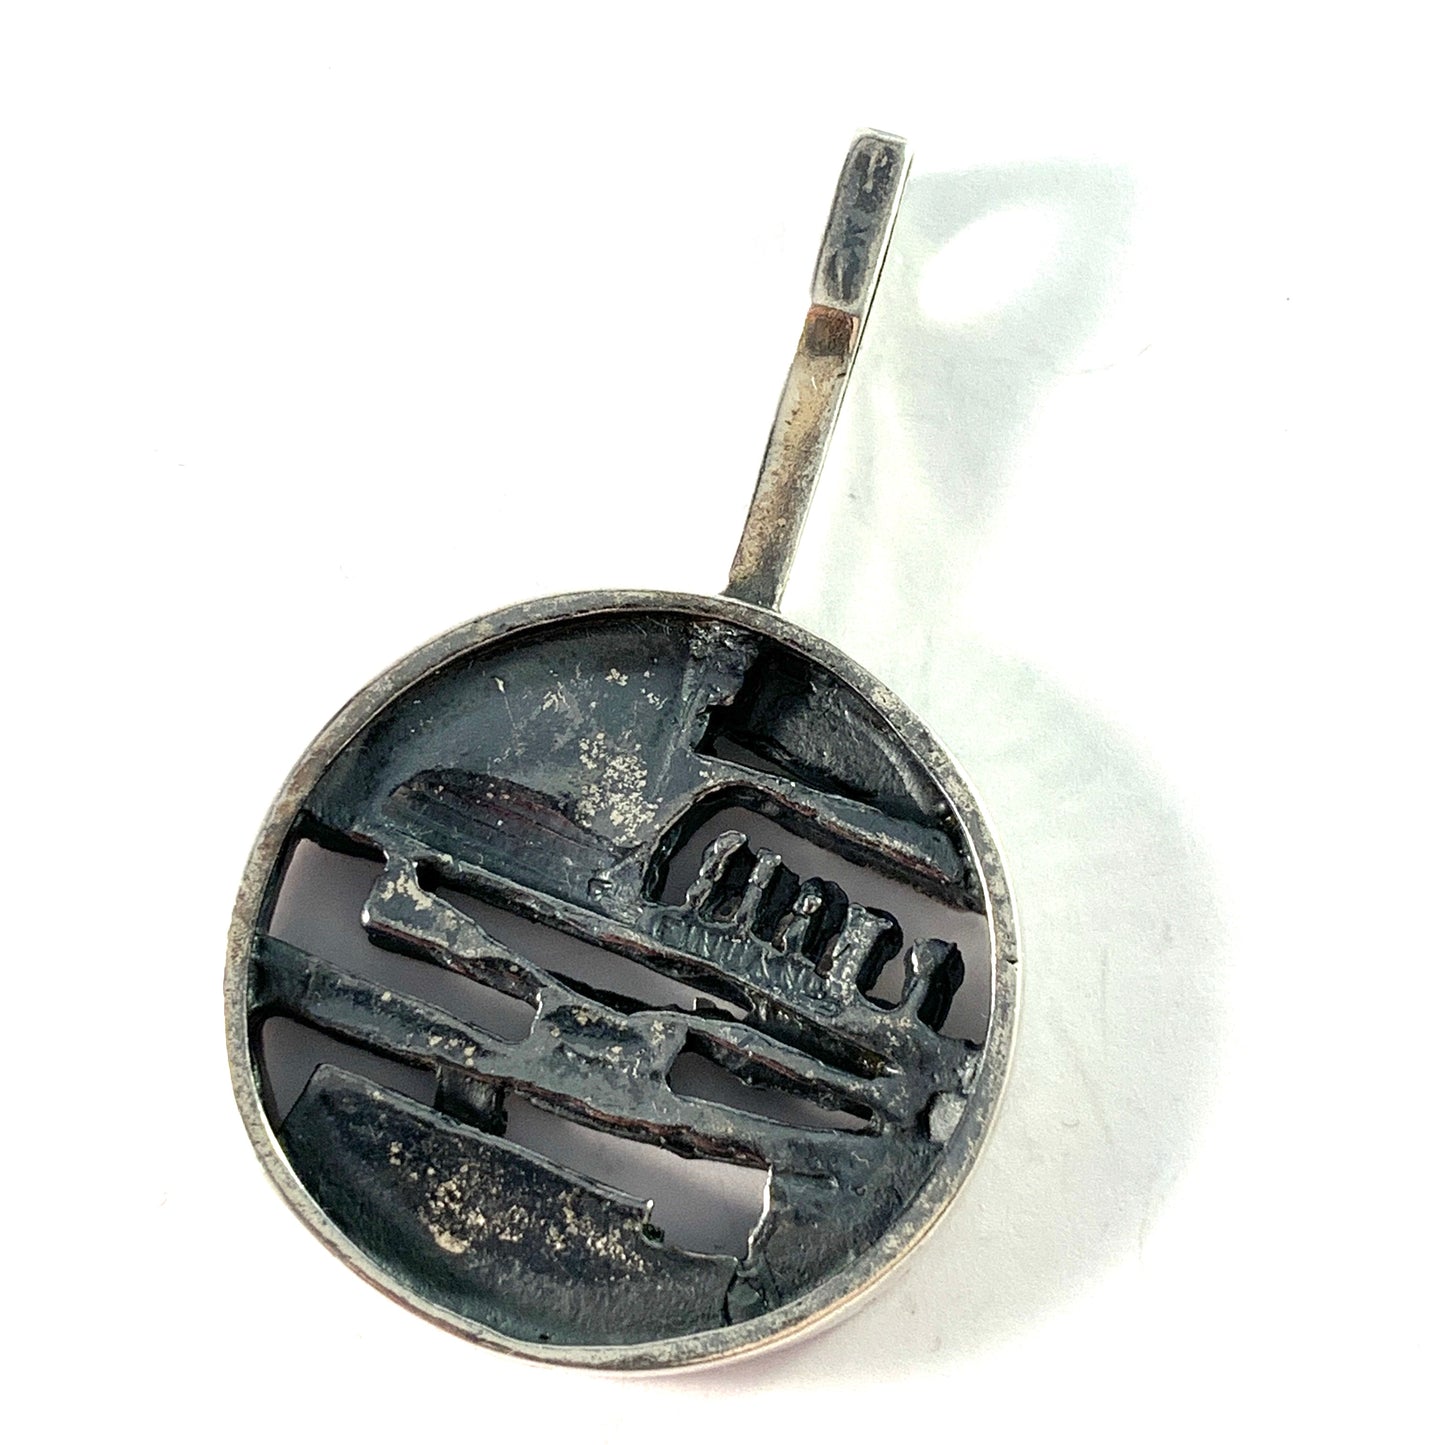 Jorma Laine for Turun Hopea Finland 1974 Modernist Signed Solid Silver Pendant.